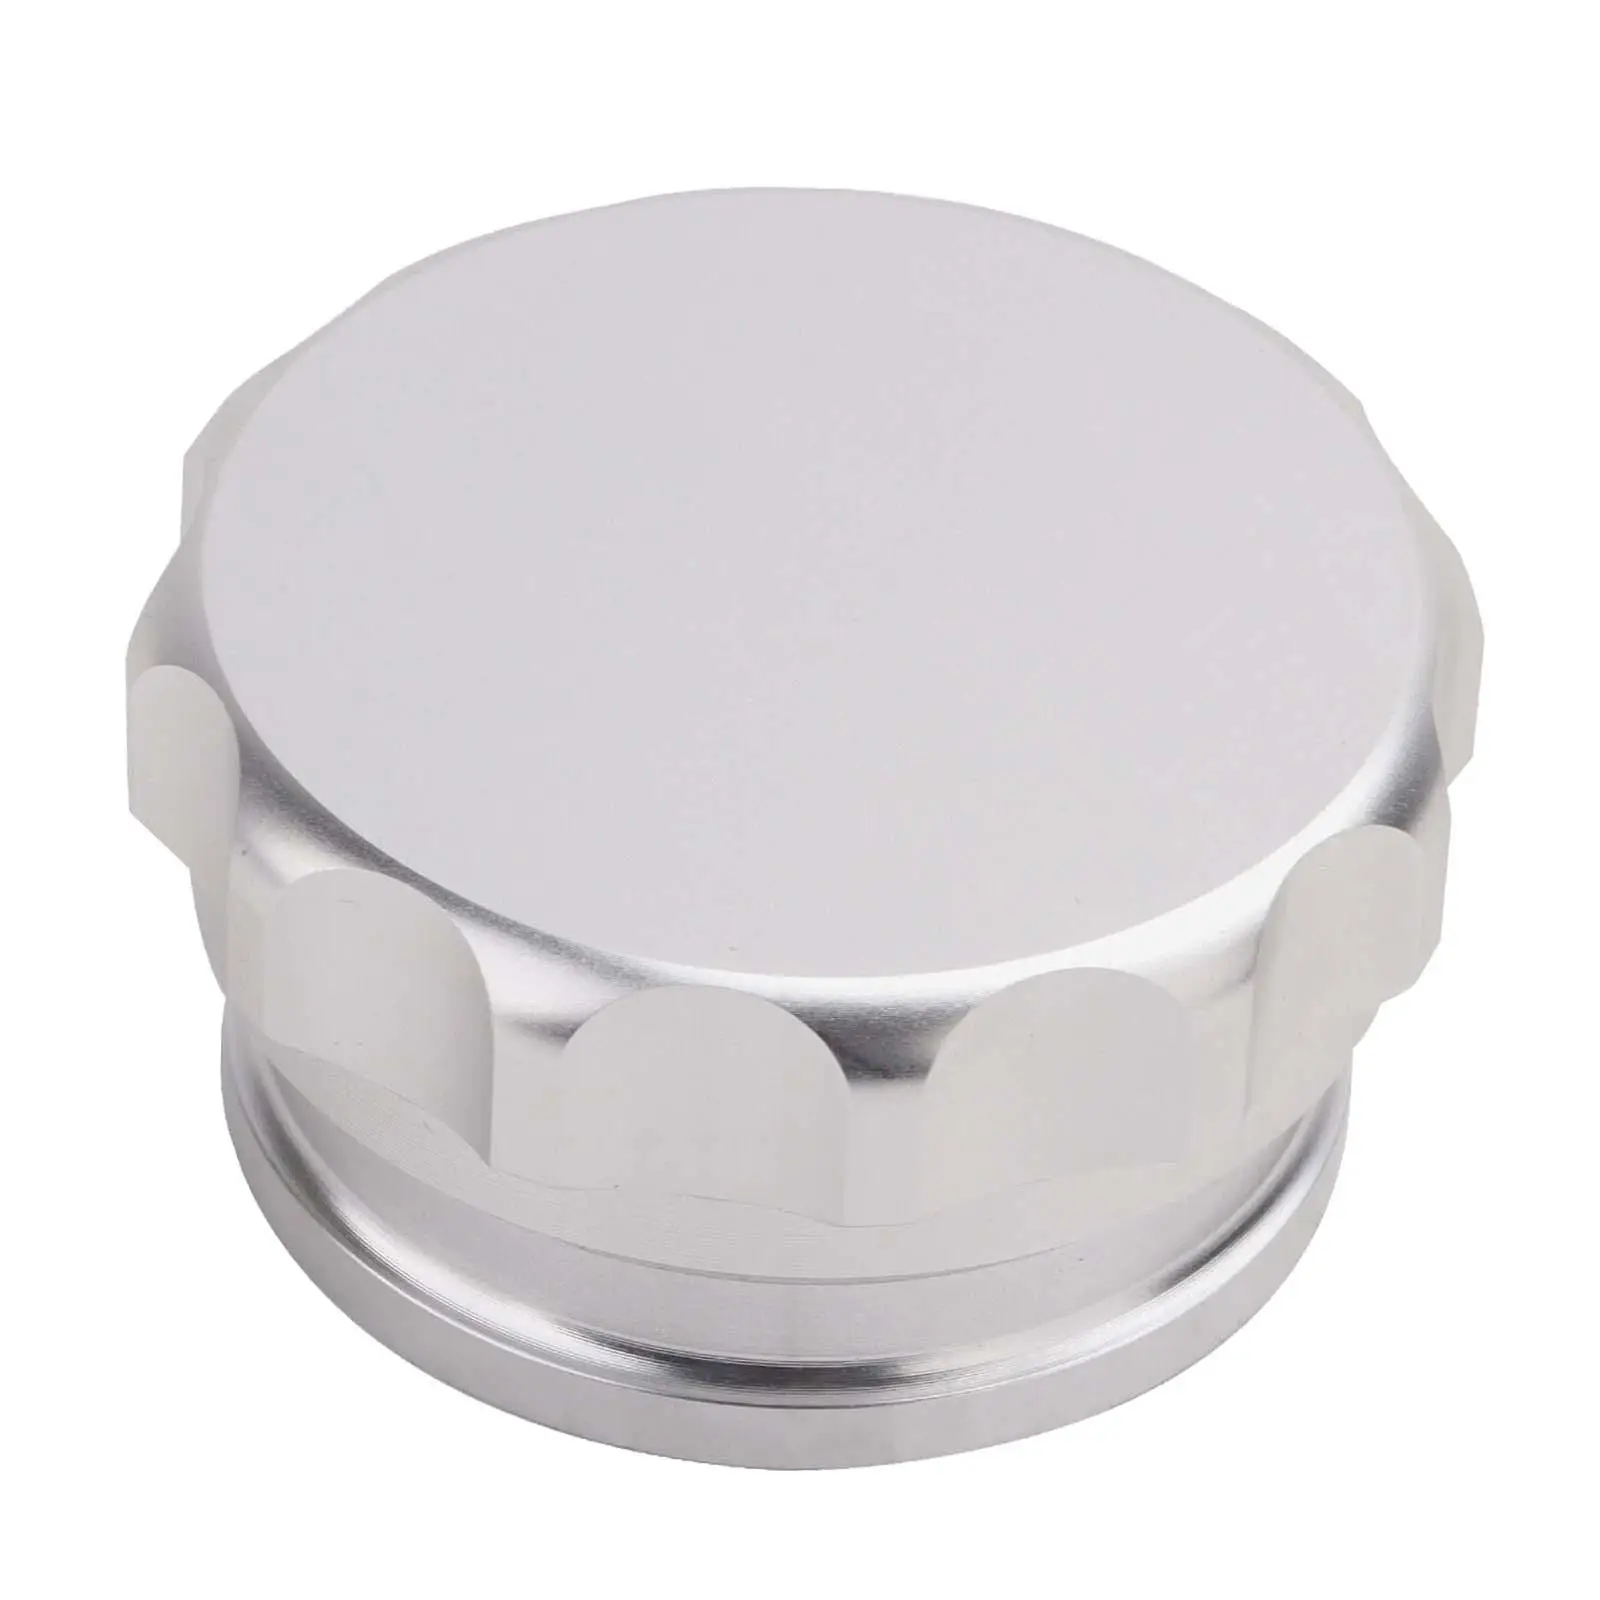 Weld on Filler Cap Aluminum Alloy Durable Accessory Sturdy Universal Replace